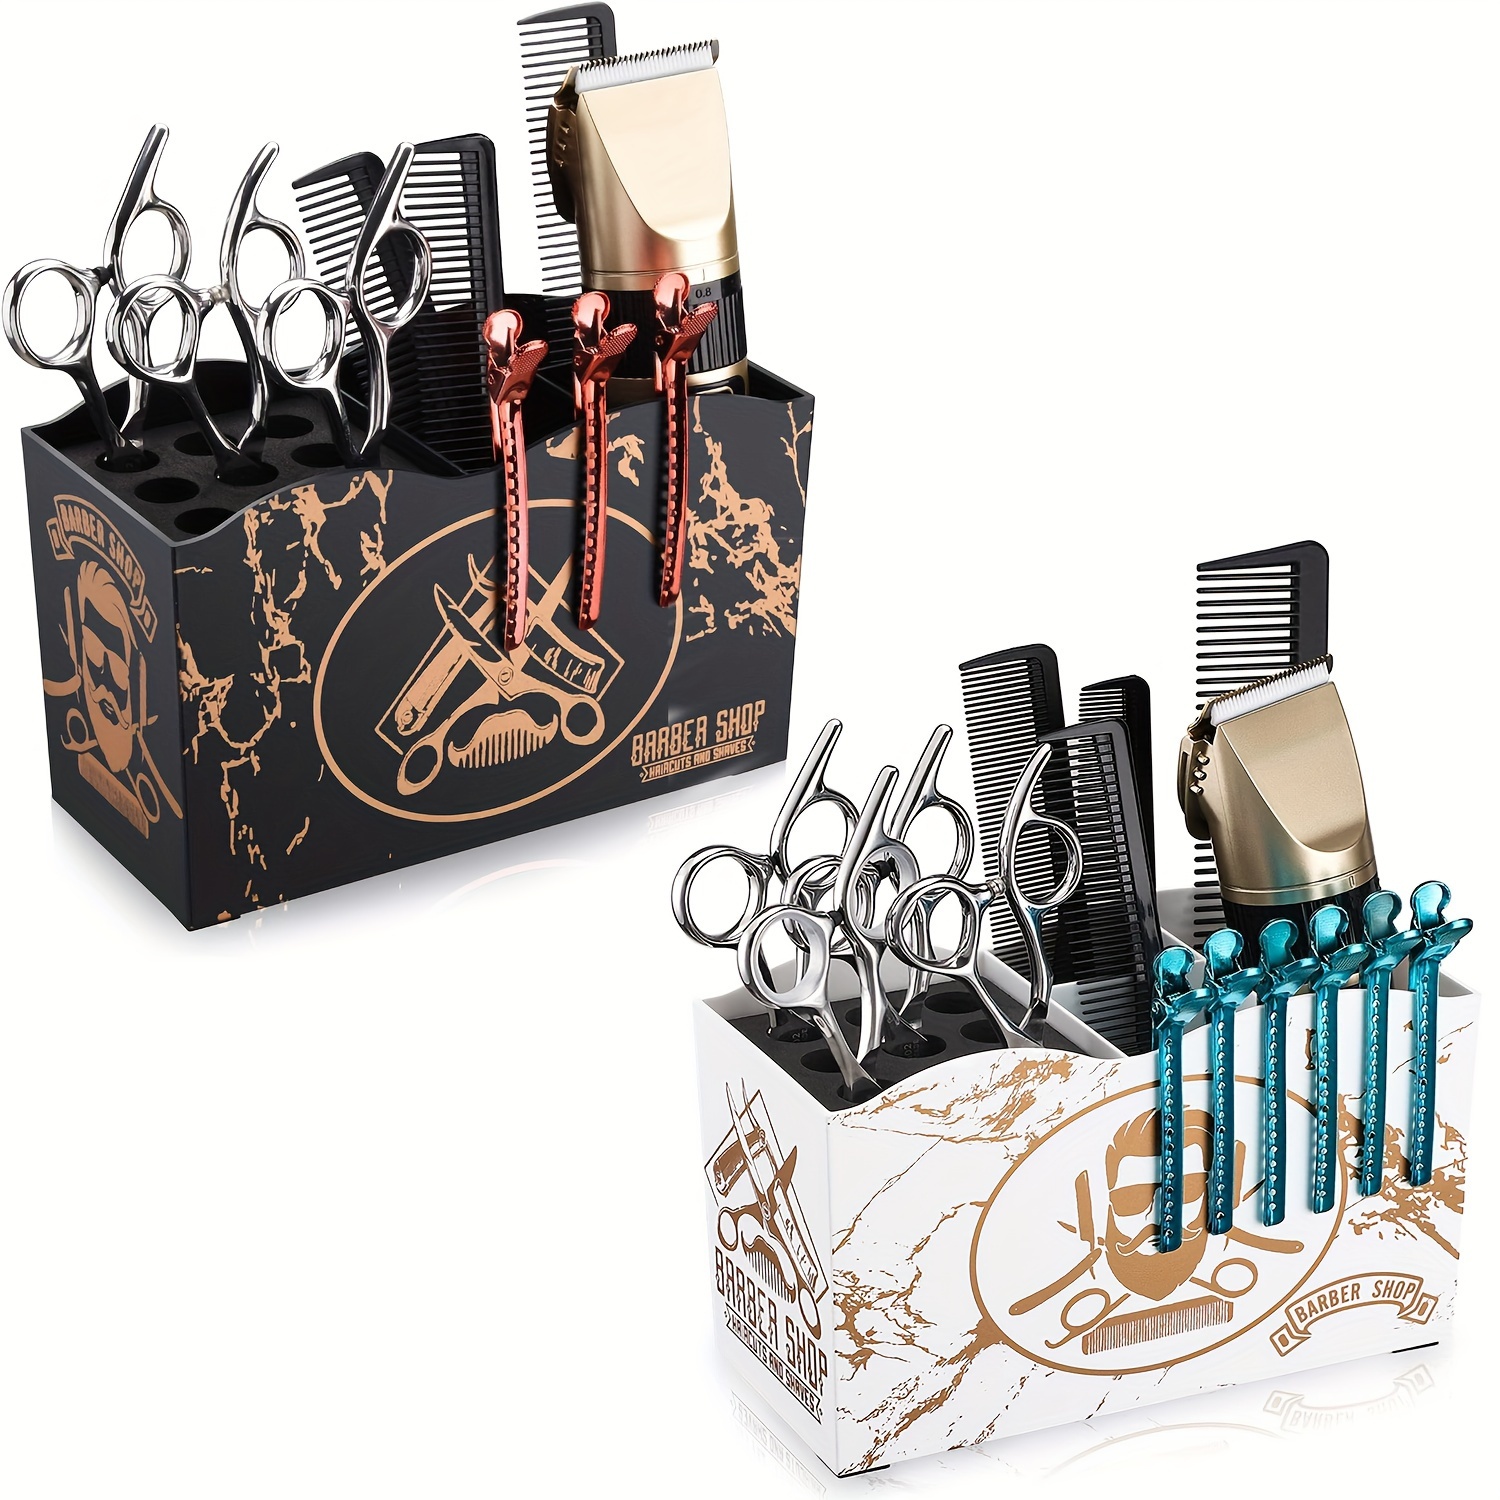 

Barber Scissors Holder Box, Professional Salon Hairdressing Scissors Rack Holder Storage Organizer For Hairstyling Combs Clips Brushes (box Only)